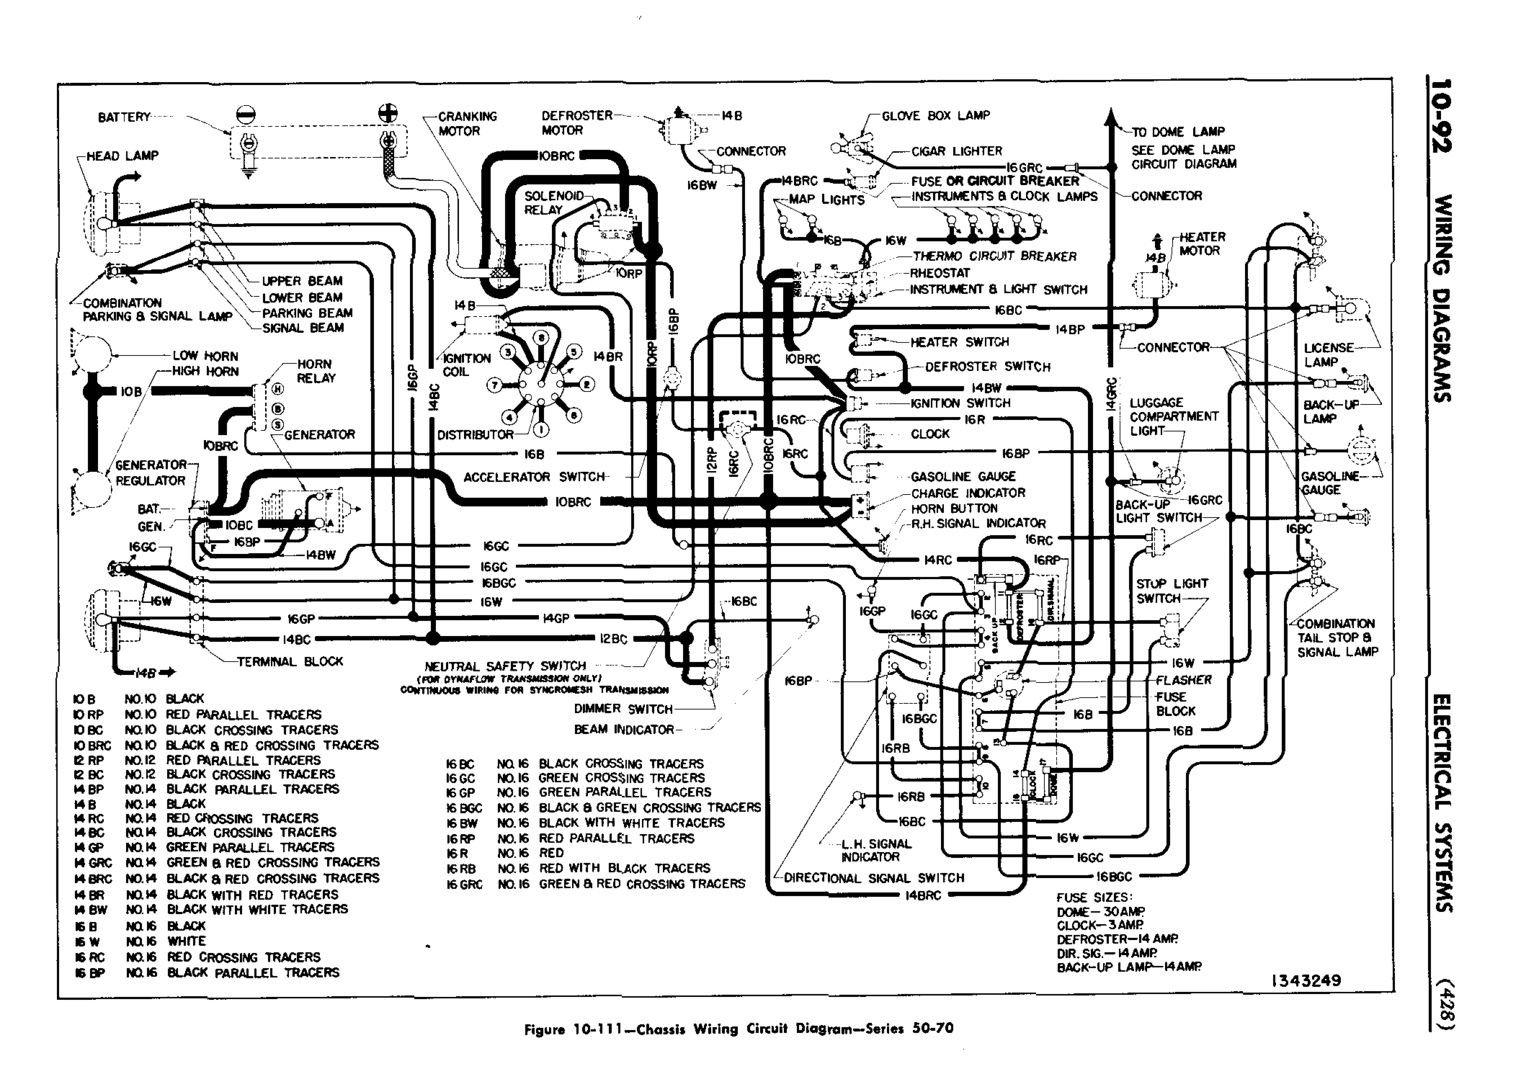 n_11 1952 Buick Shop Manual - Electrical Systems-092-092.jpg